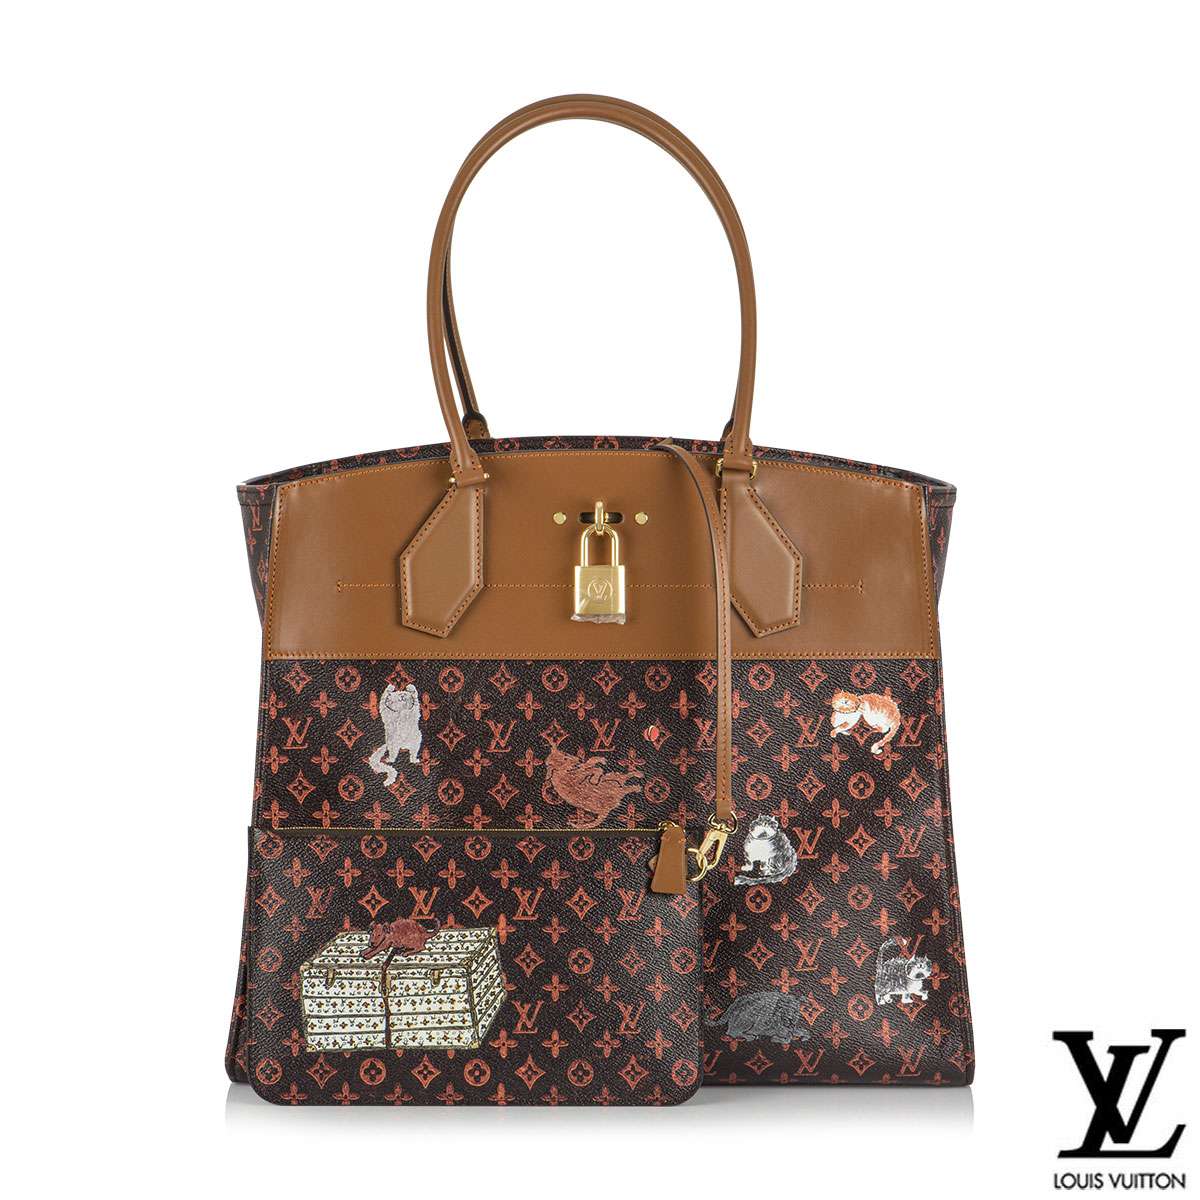 Louis Vuitton on X: From 1901 to today: #LouisVuitton's Steamer